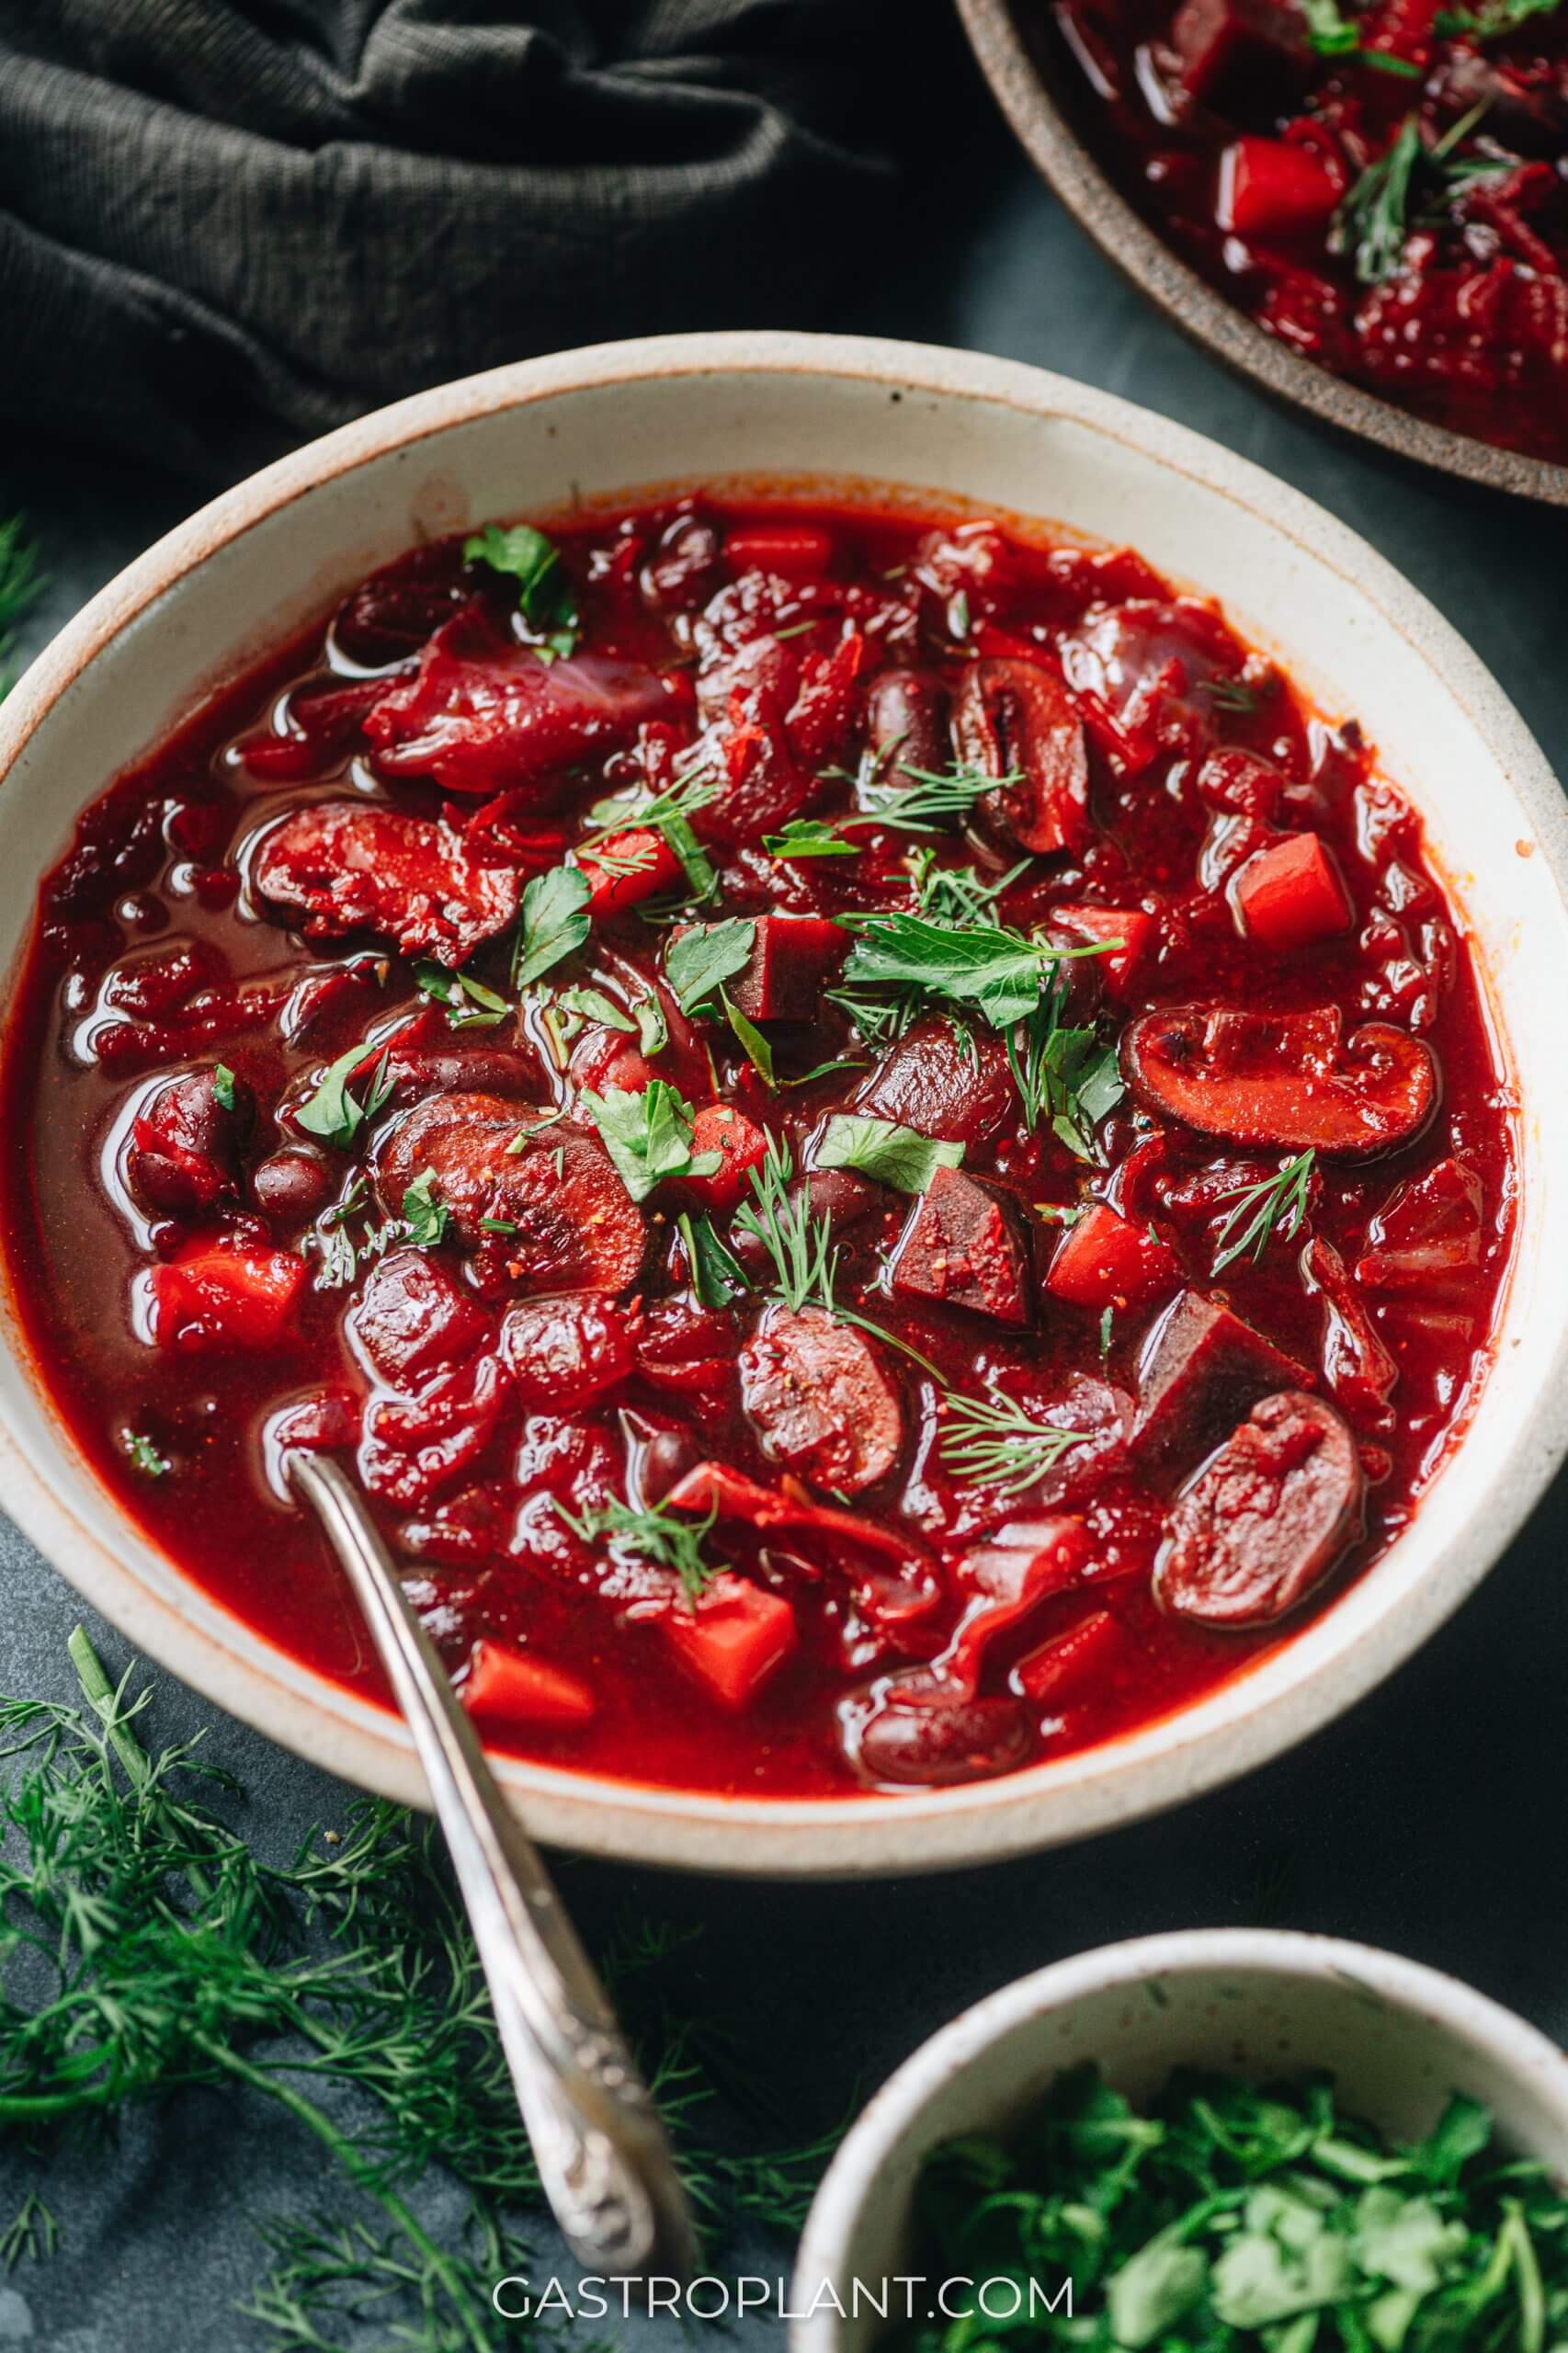 A bowl of bright red vegan borscht soup with herbs and spices and vegetables